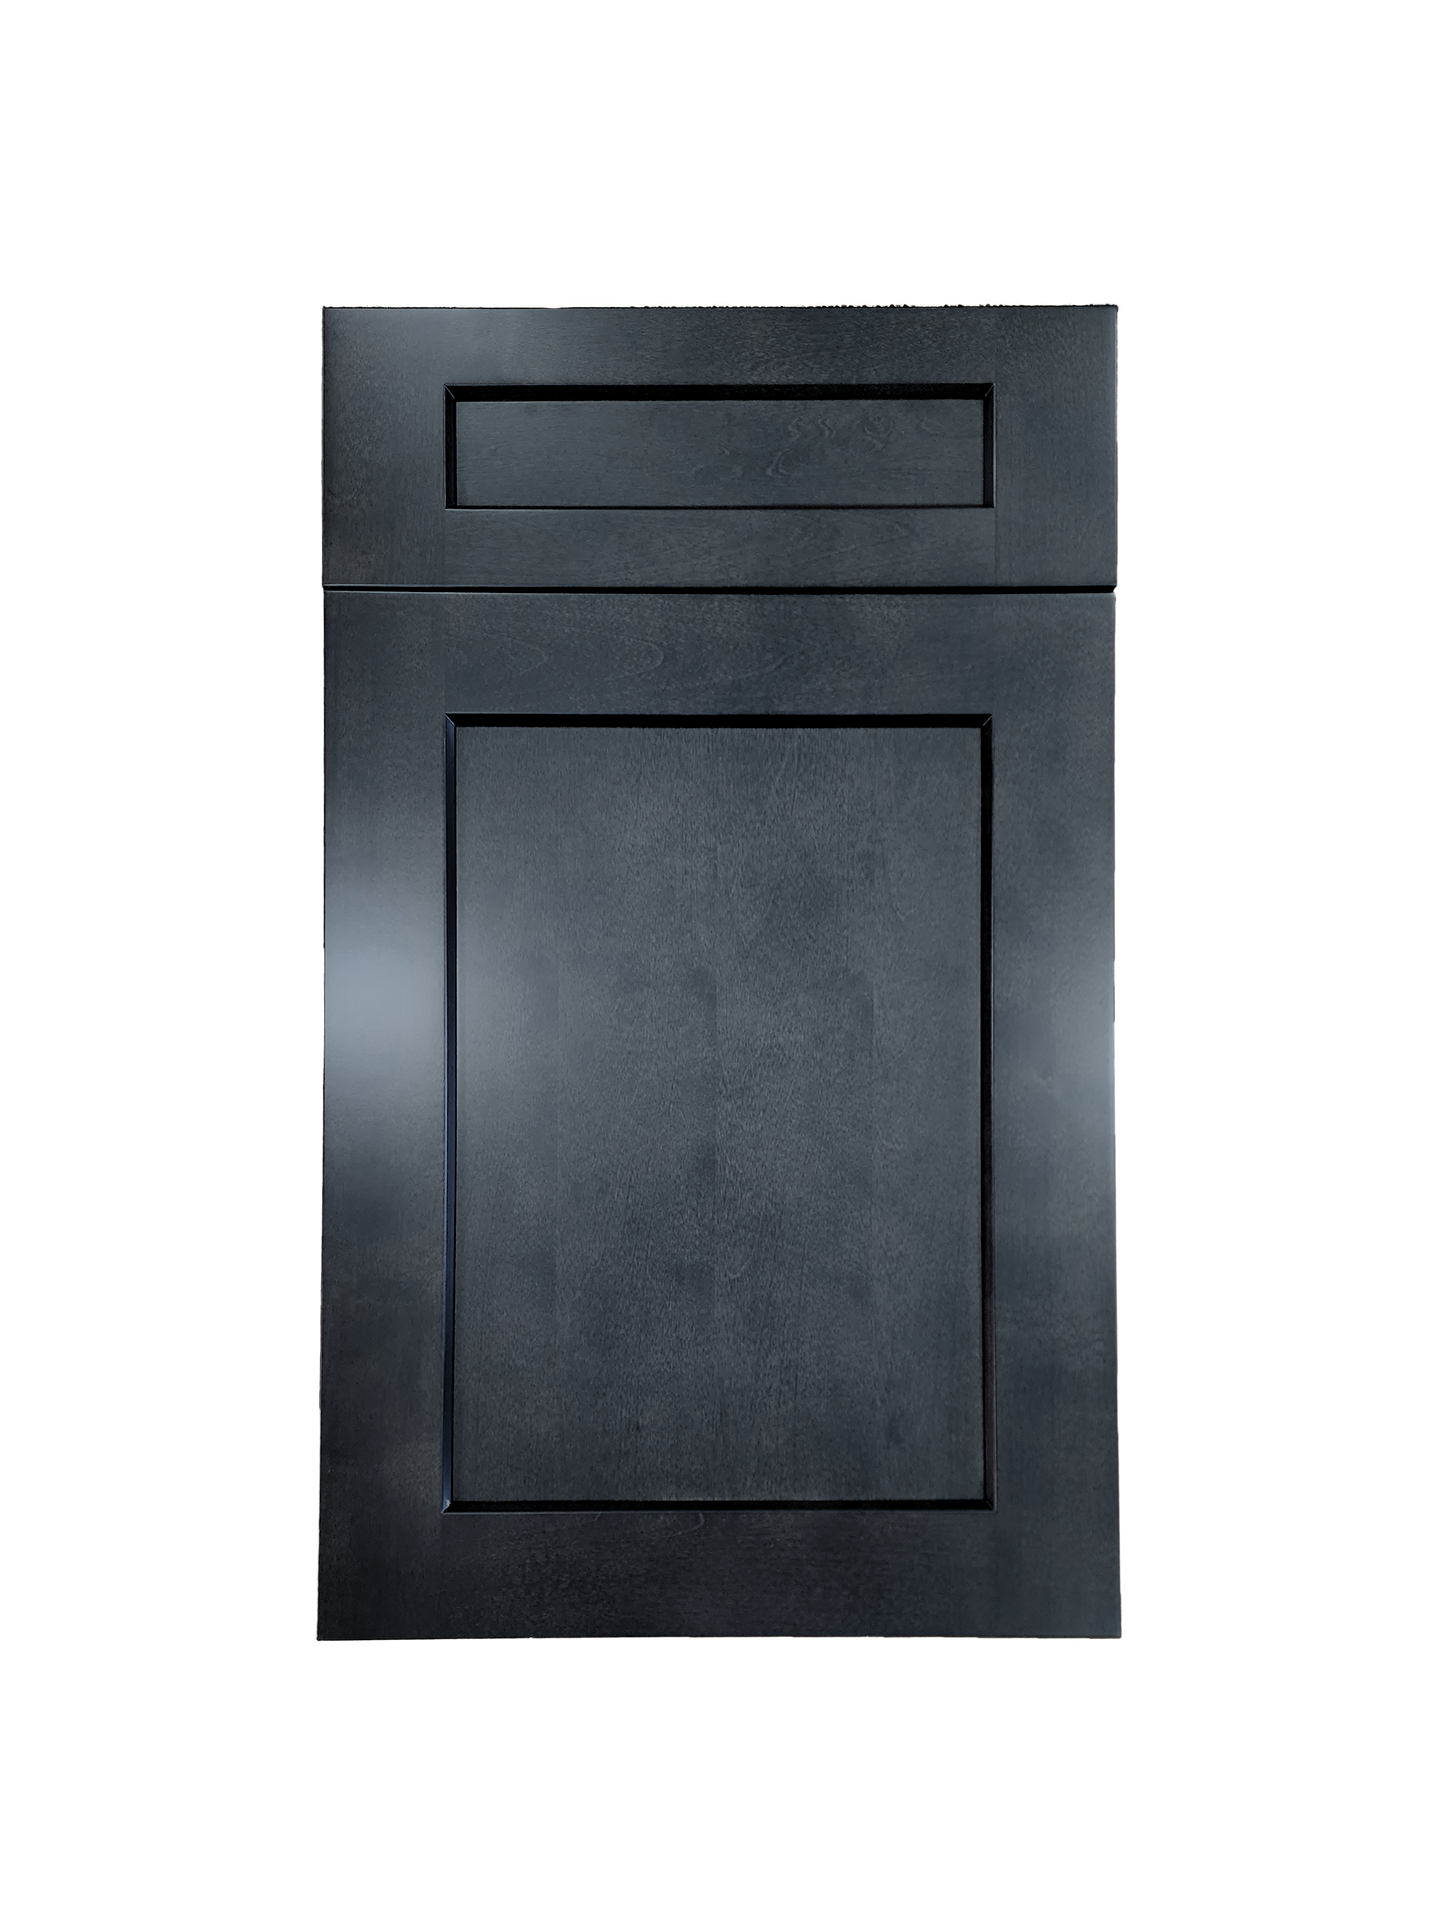 Stormy Grey Wall Cabinet 33 inches wide 12 inches deep 36 inches tall with Stormy Grey box and Stormy Grey doors